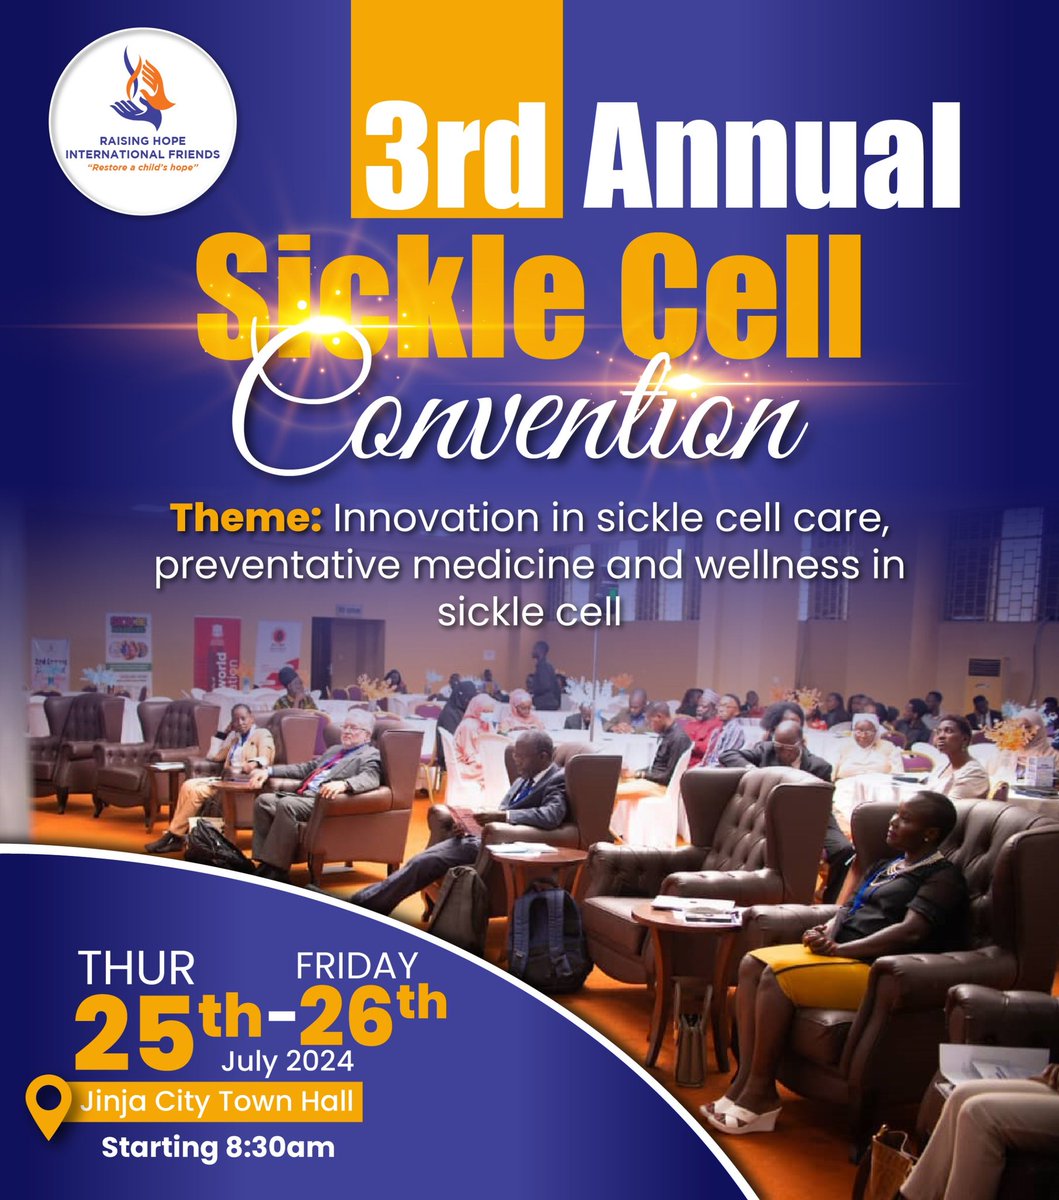 The 2024 Sickle Cell Convention in Jinja isn’t just a meeting point—it’s a launching pad for the change we wish to see in the world of sickle cell care. @caring_cross @GlobalGenes @ddanielroy @SickleCellMI @FundSickleCell @terumobct @MinofHealthUG @Isaacchamp1 @wistoneag